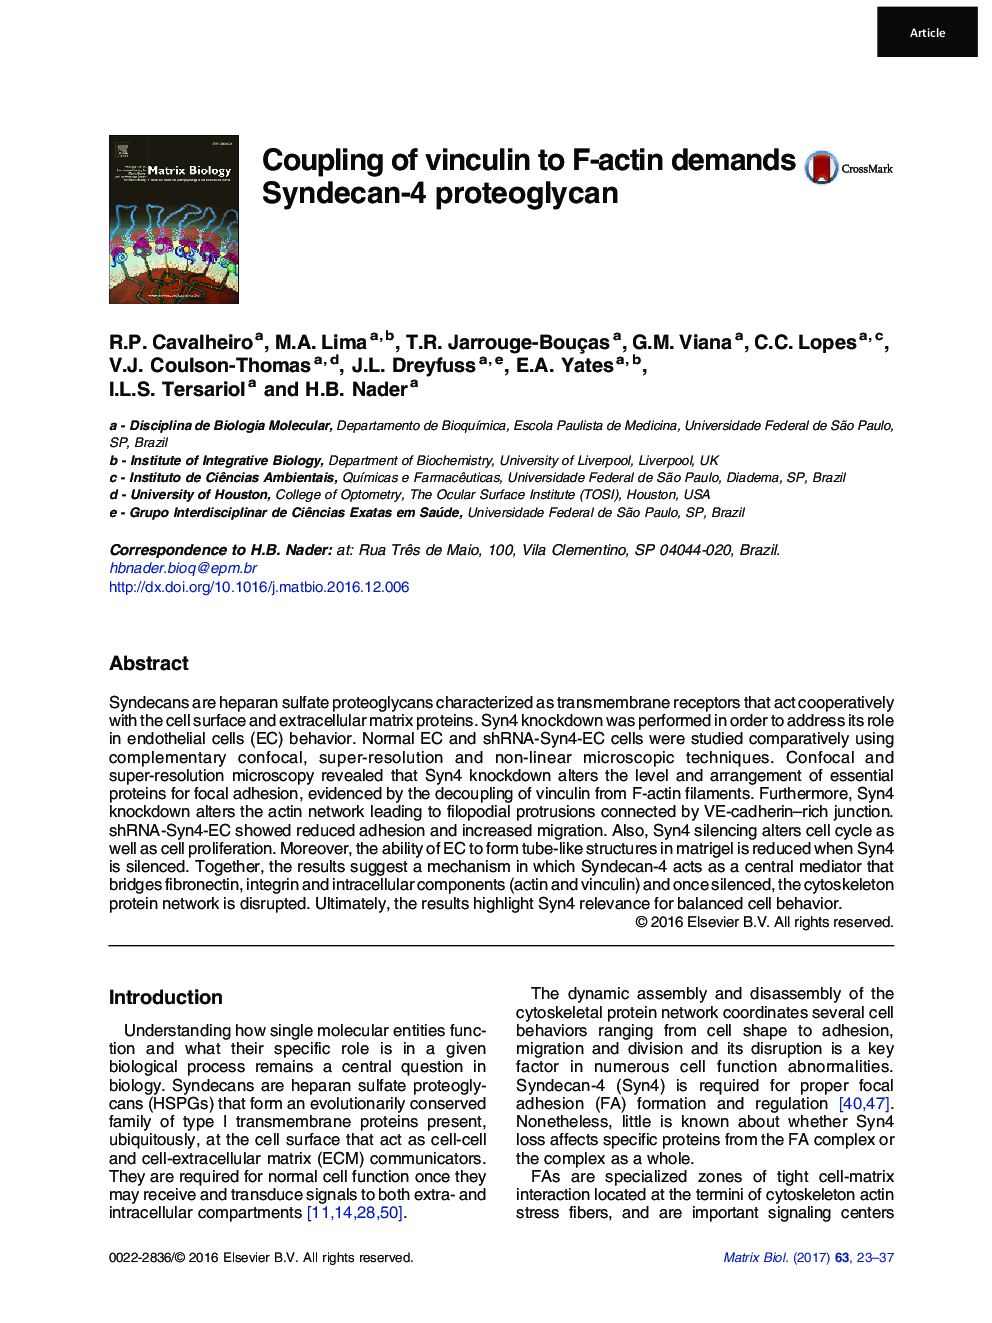 Coupling of vinculin to F-actin demands Syndecan-4 proteoglycan